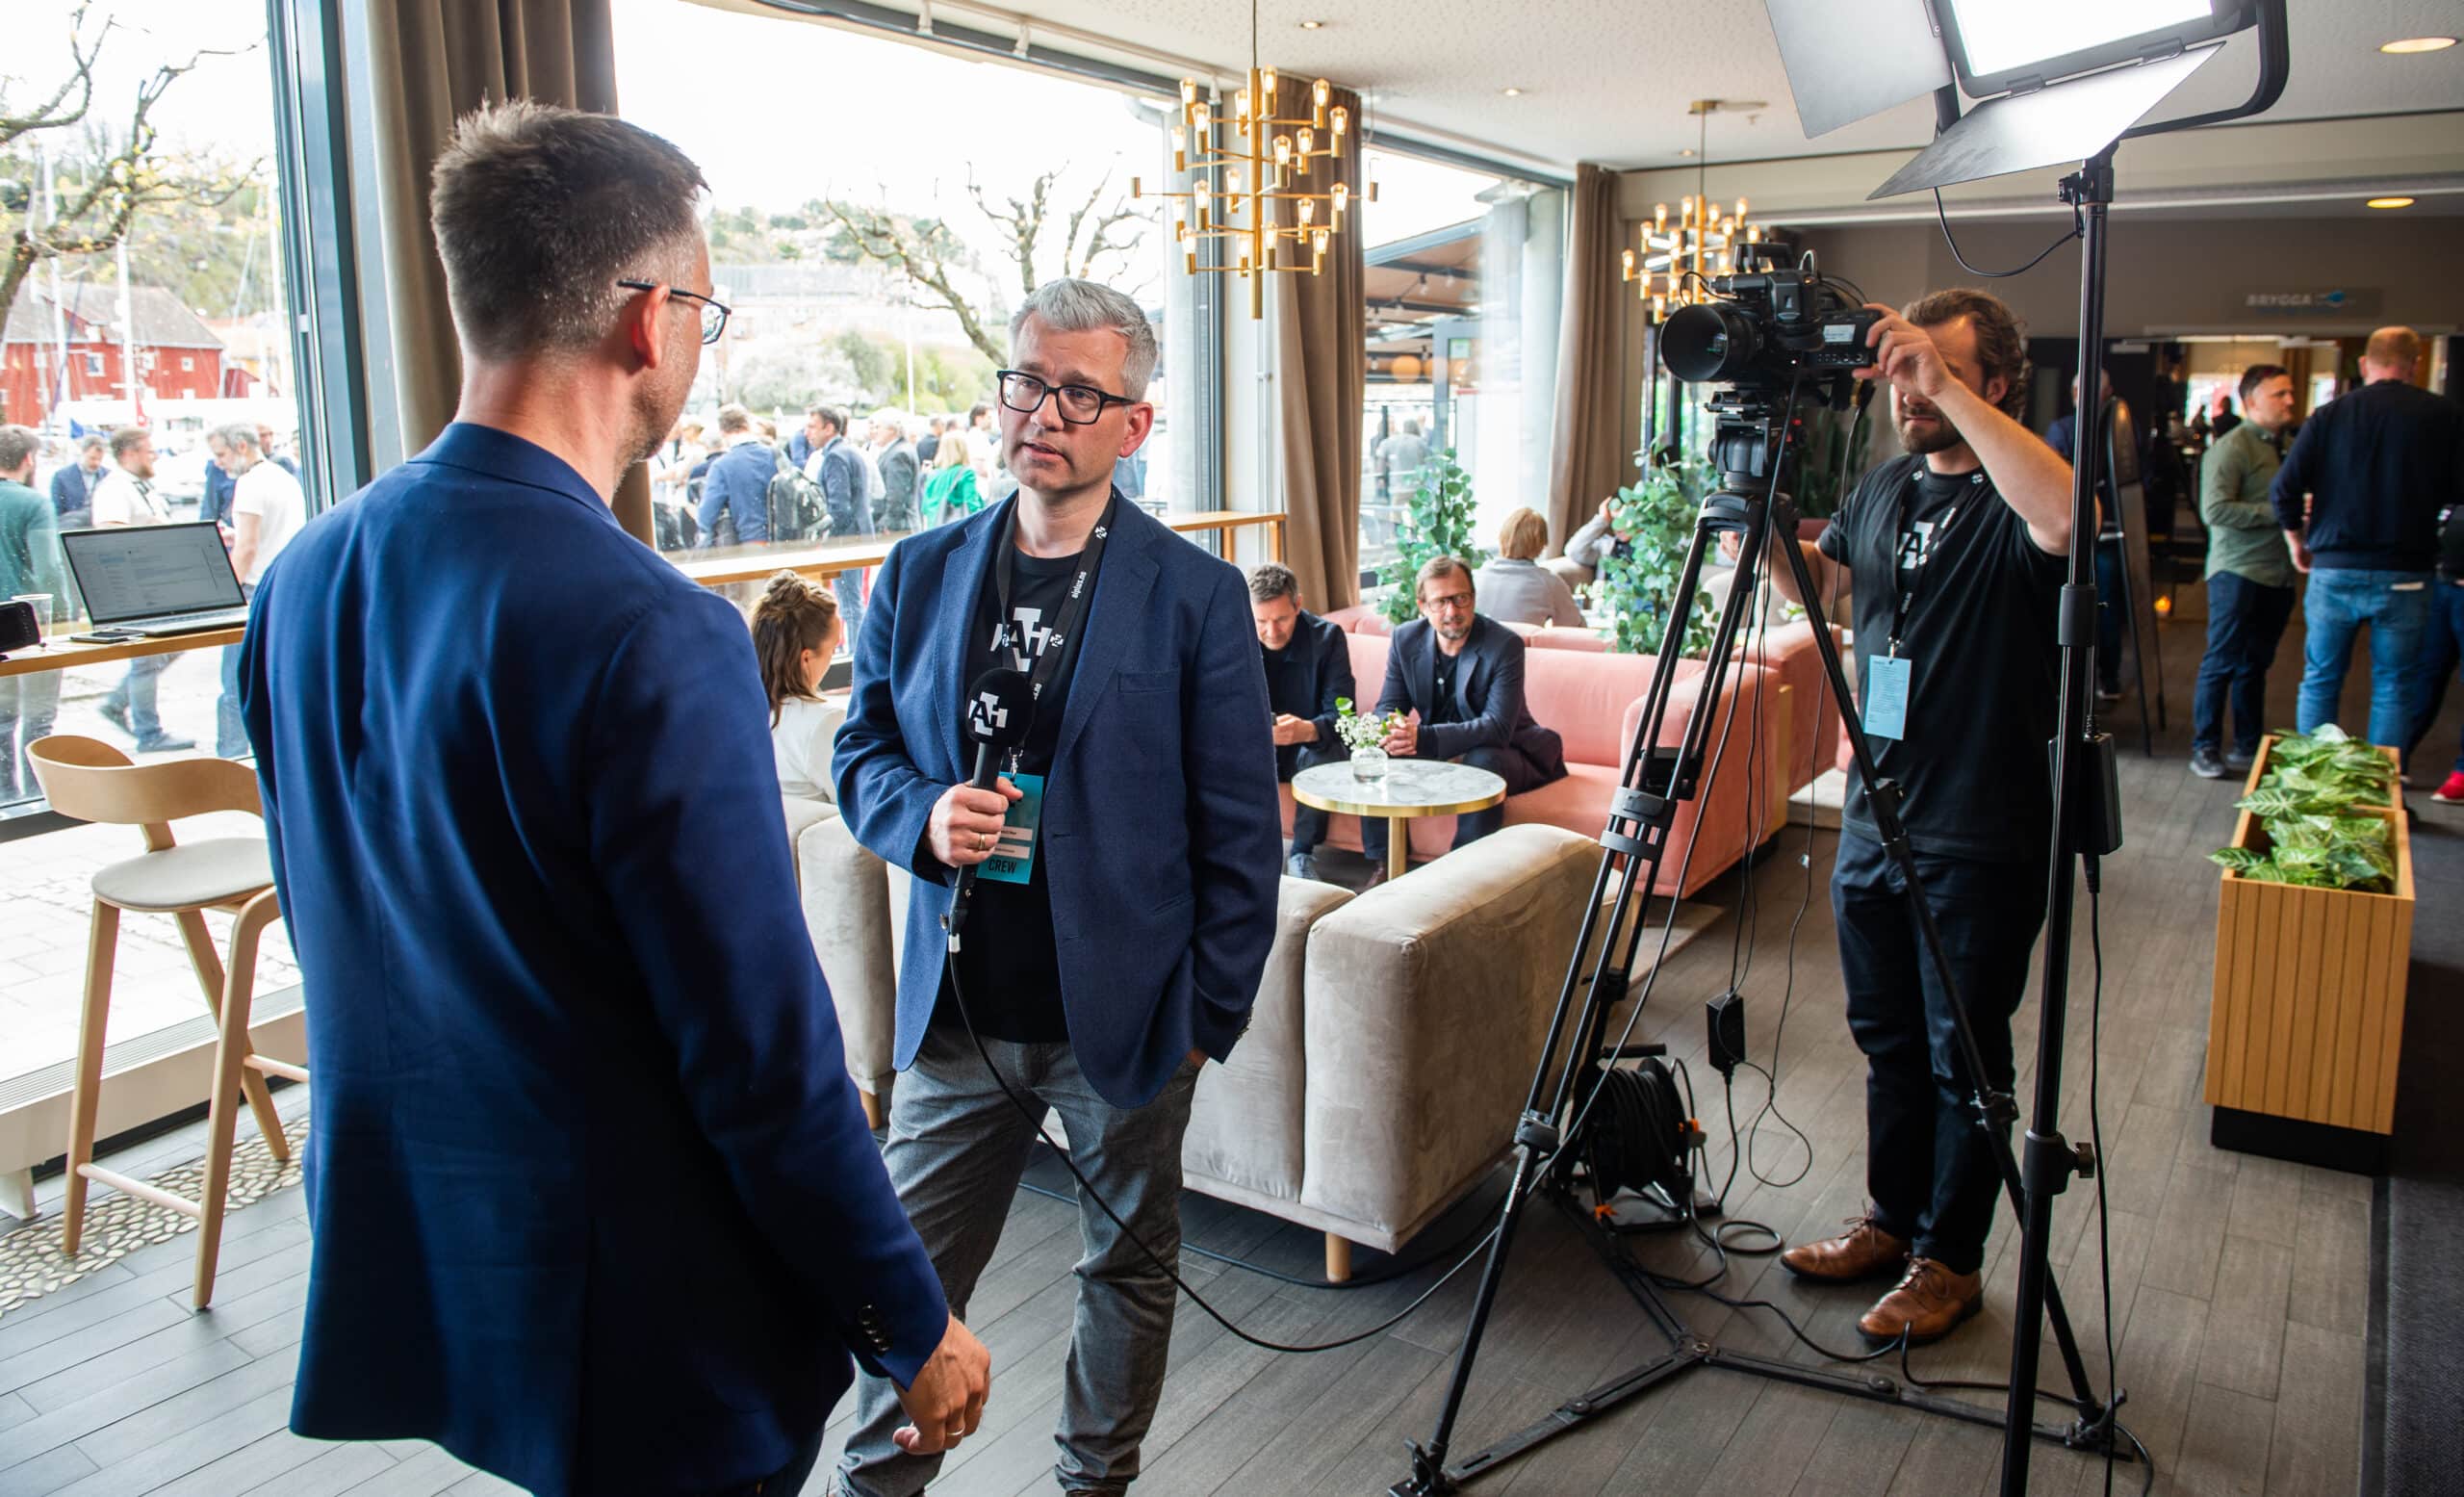 The AI+ Communication Team interviewed the speakers. PHOTO: Stein Johnsen, Contentvideo.no